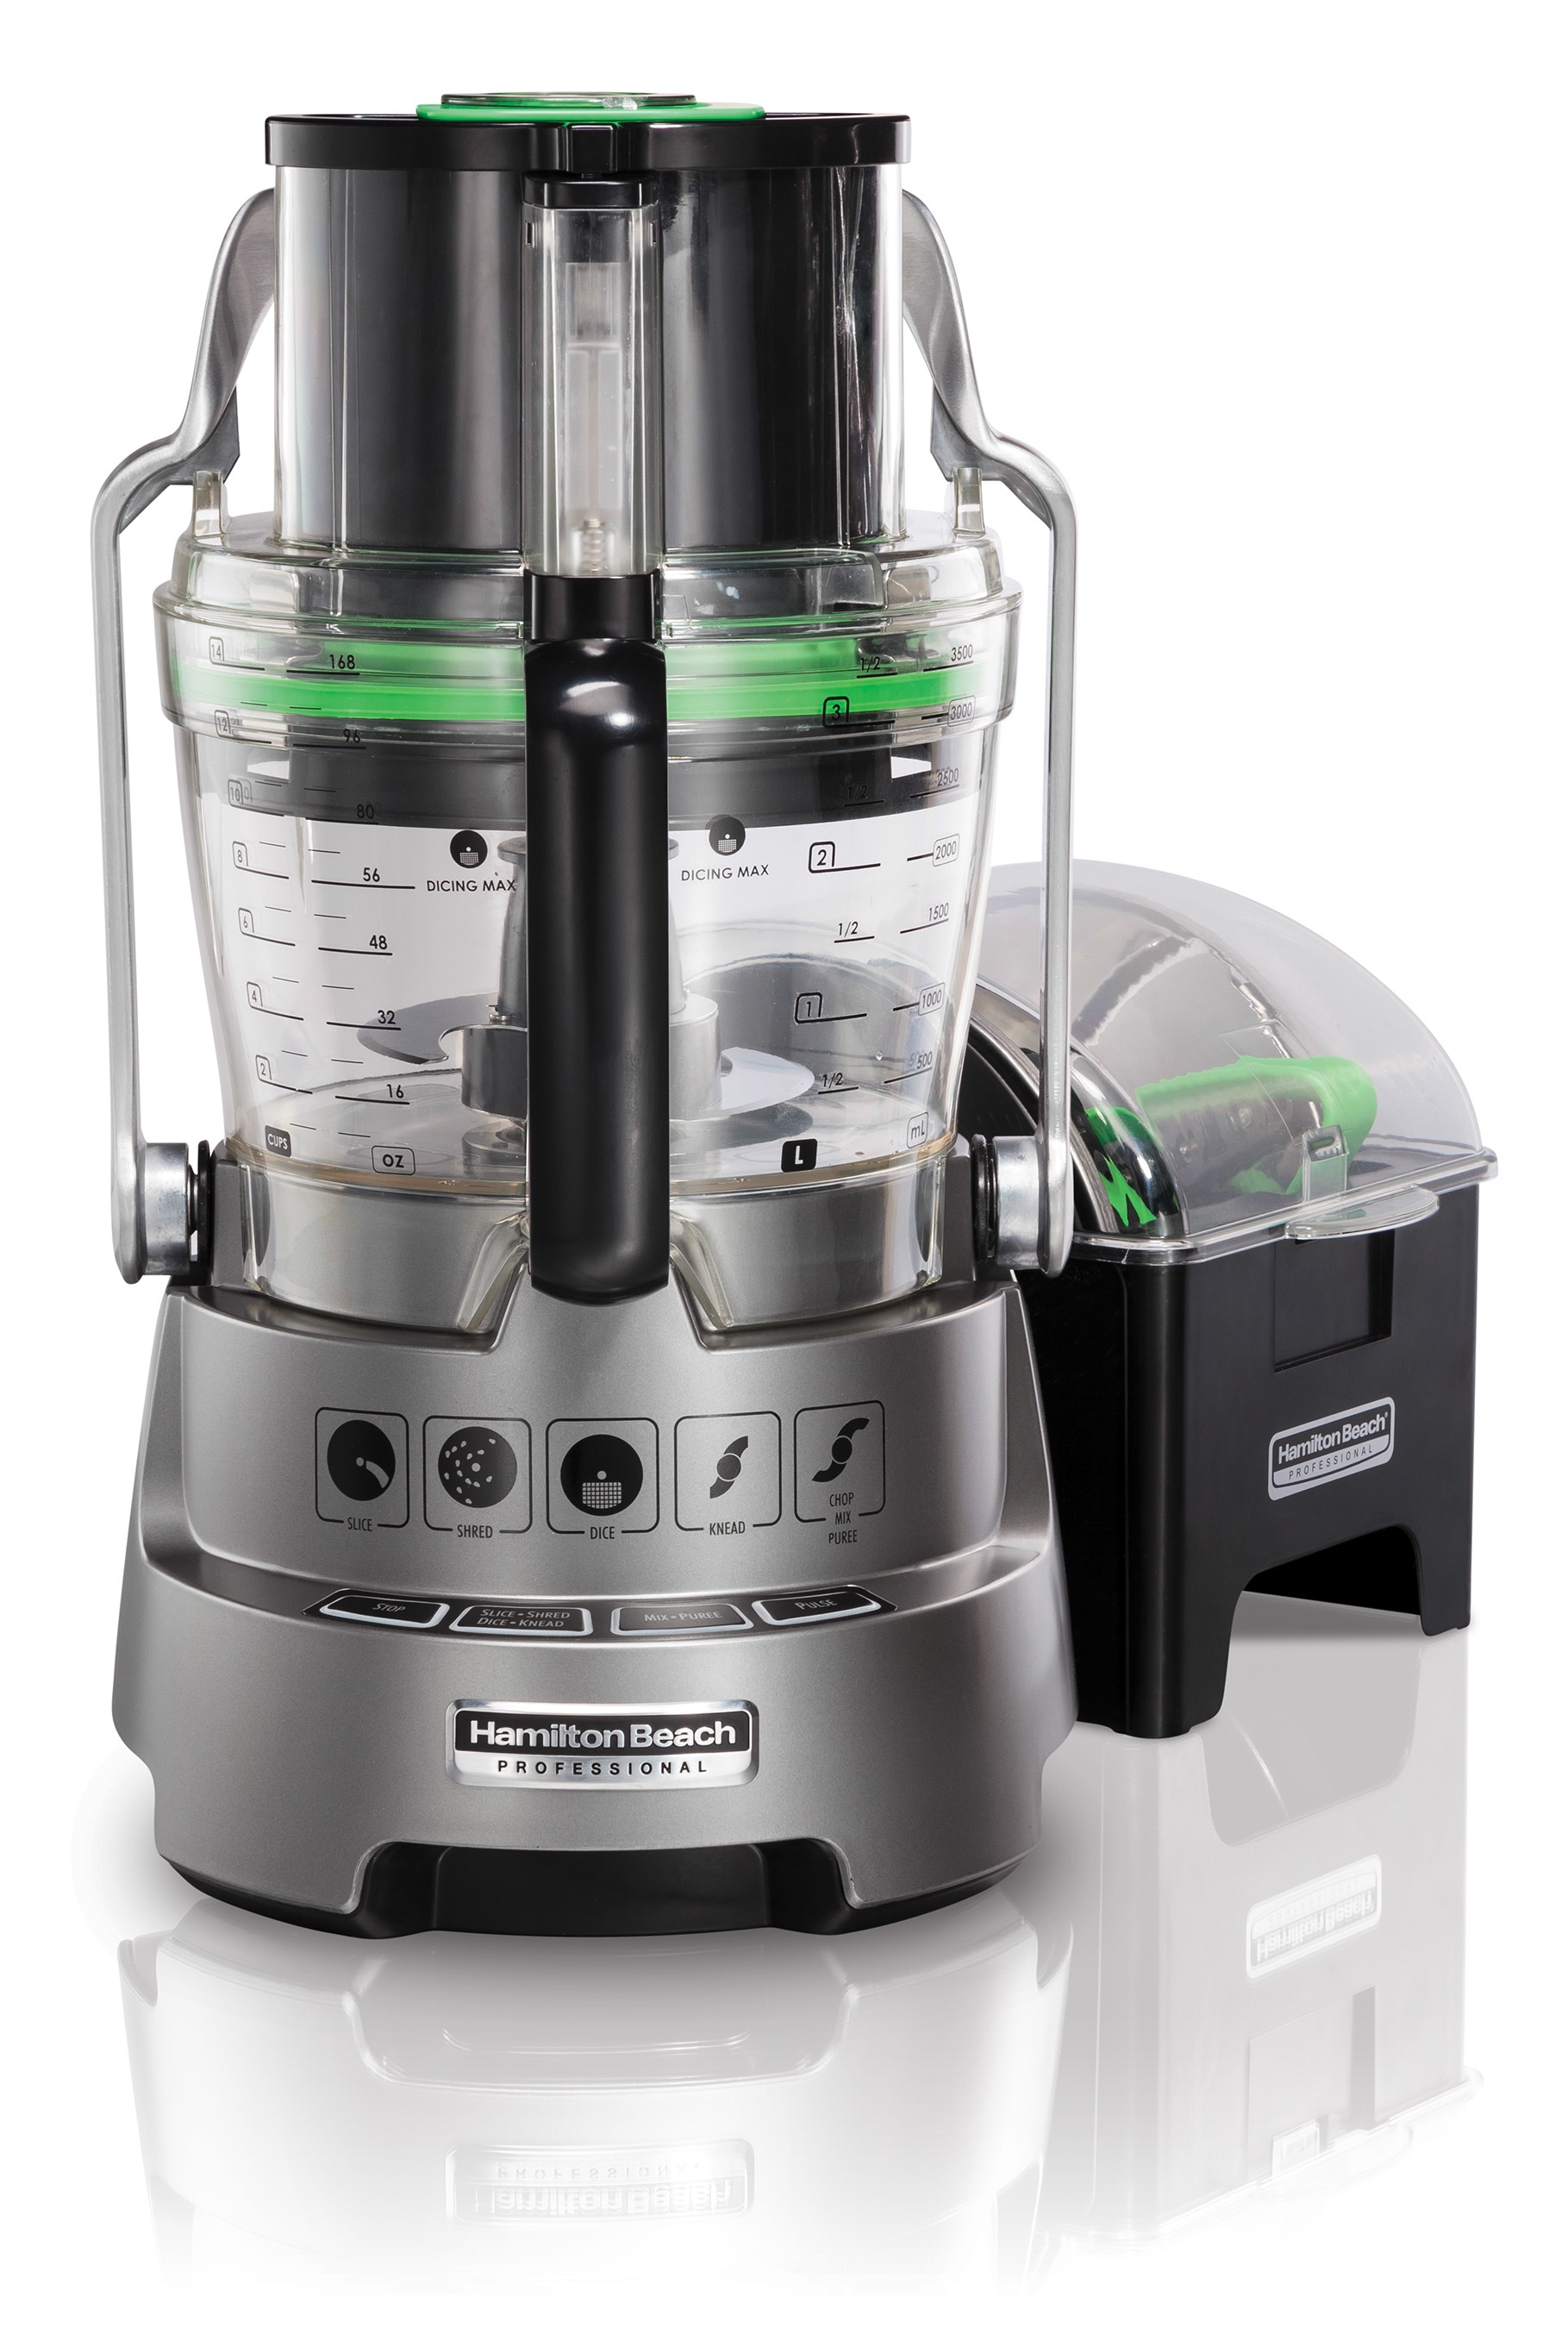 Food, product review and FREEBIES – Win Hamilton Beach Professional Dicing  Stack and Snap Food Processor – food blogHamilton Beach Professional Dicing  Stack and Snap Food Processor